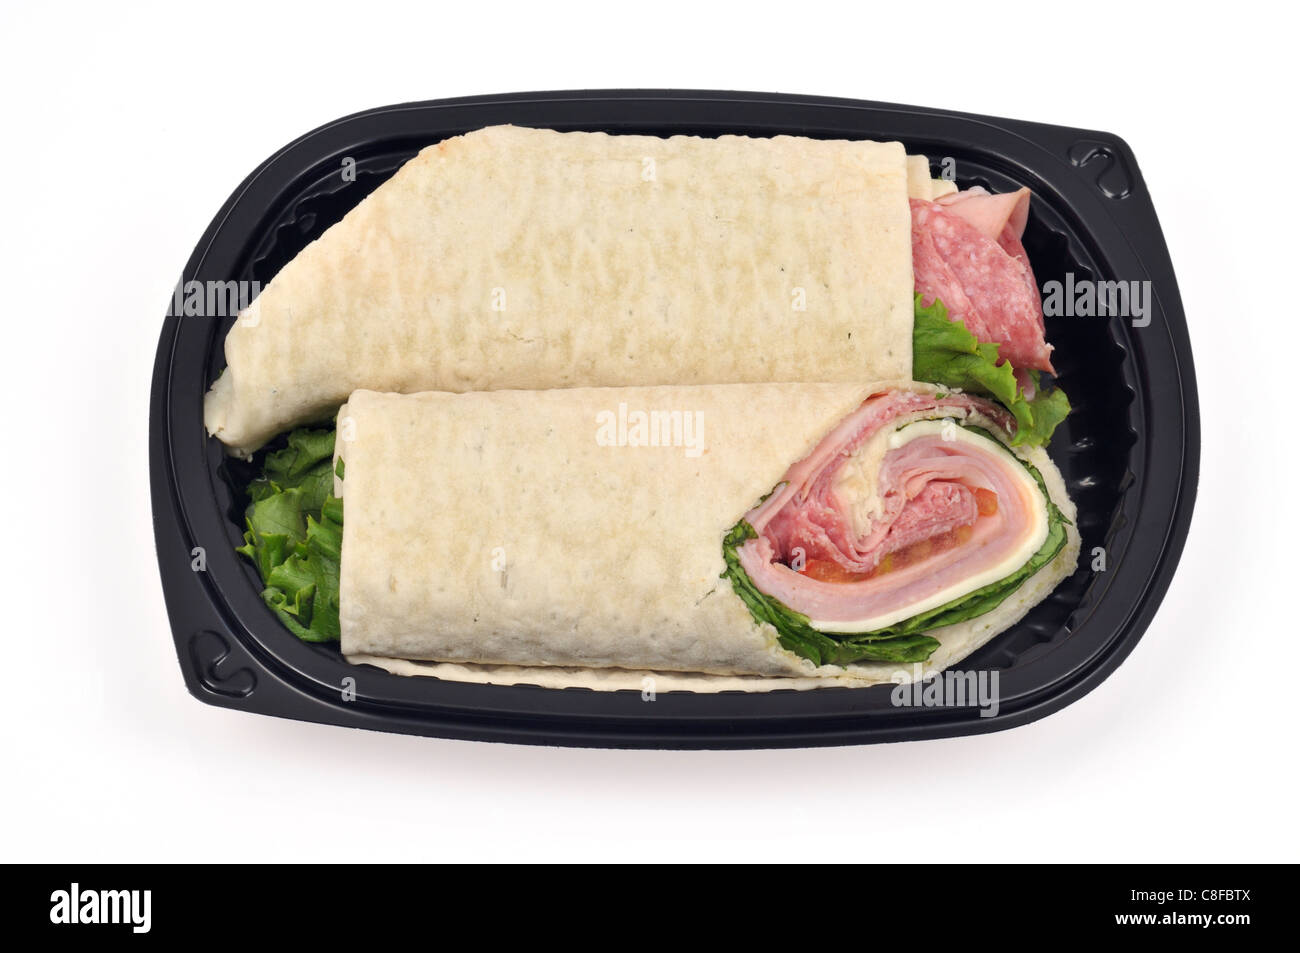 Italian deli meat wrap or roll-up sandwich with cheese lettuce & tomatoin black to go container on white background, cut out. USA Stock Photo